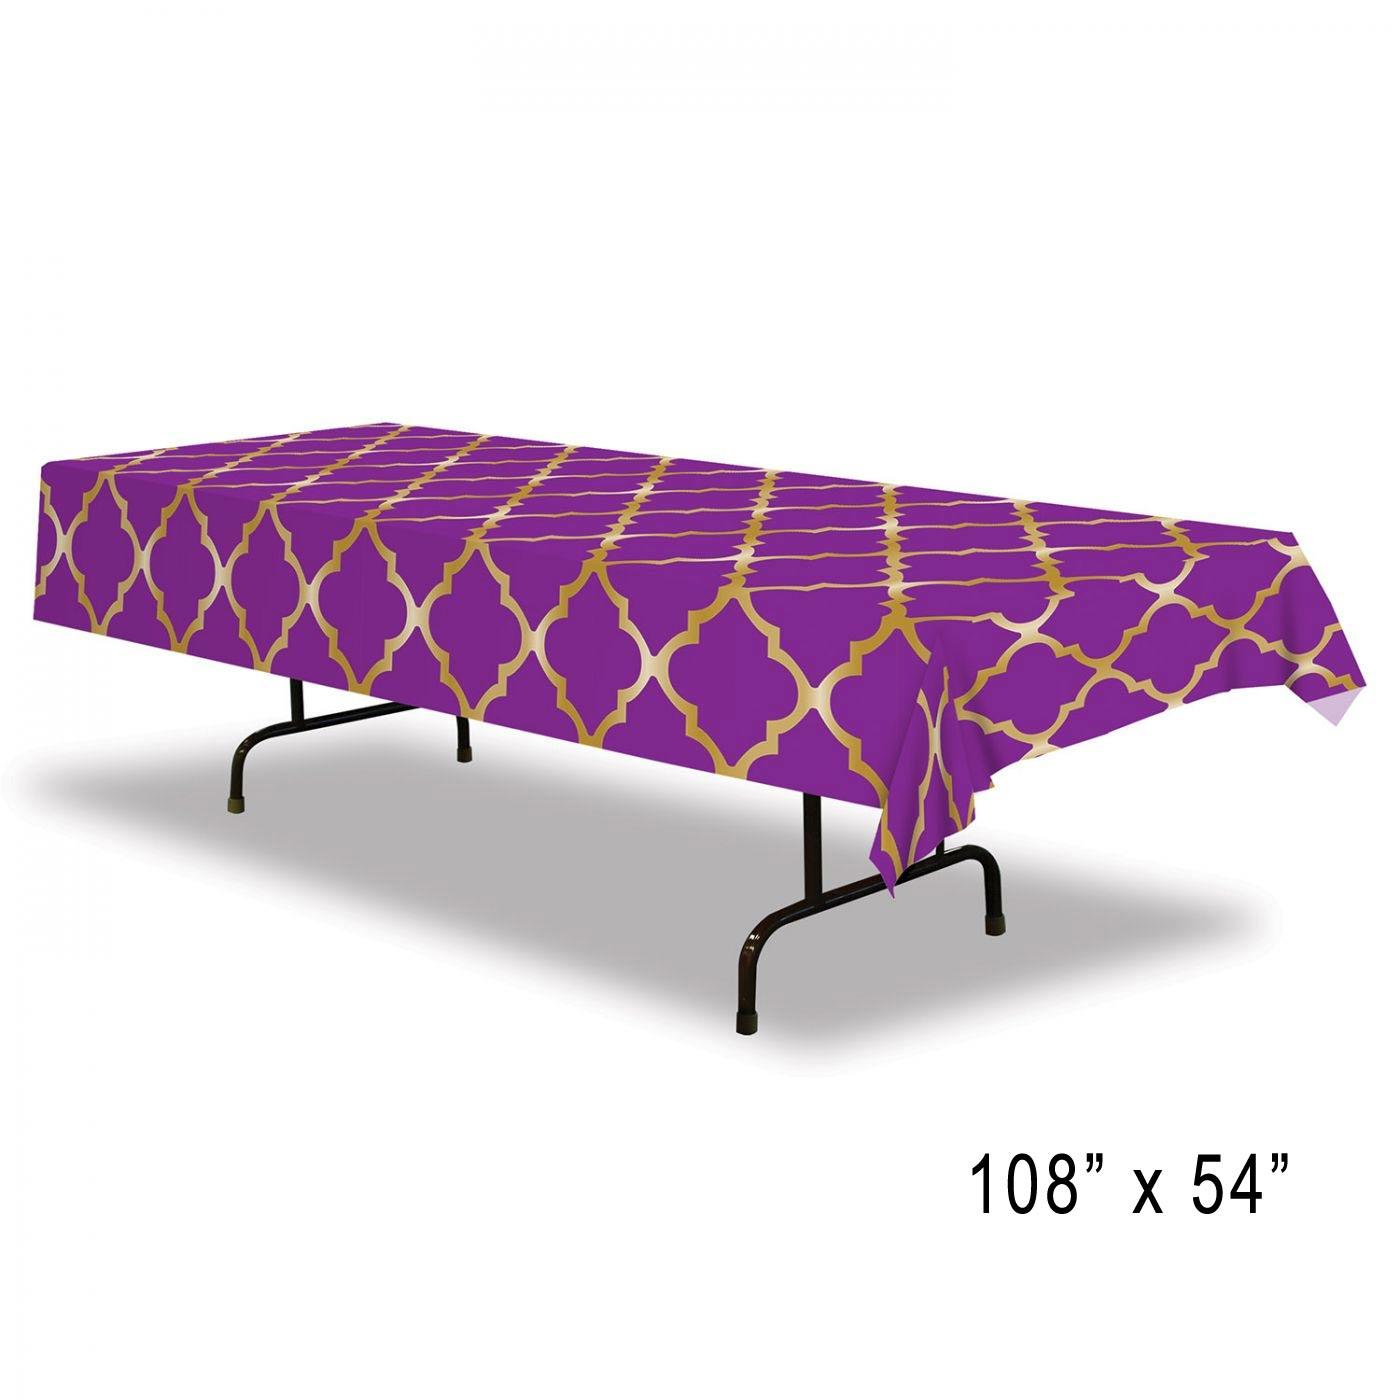 Arabian Nights Lattice Tablecover 108" x 54" by the American company Biestle 53576 and available in the UK here at Karnival Costumes online party shop